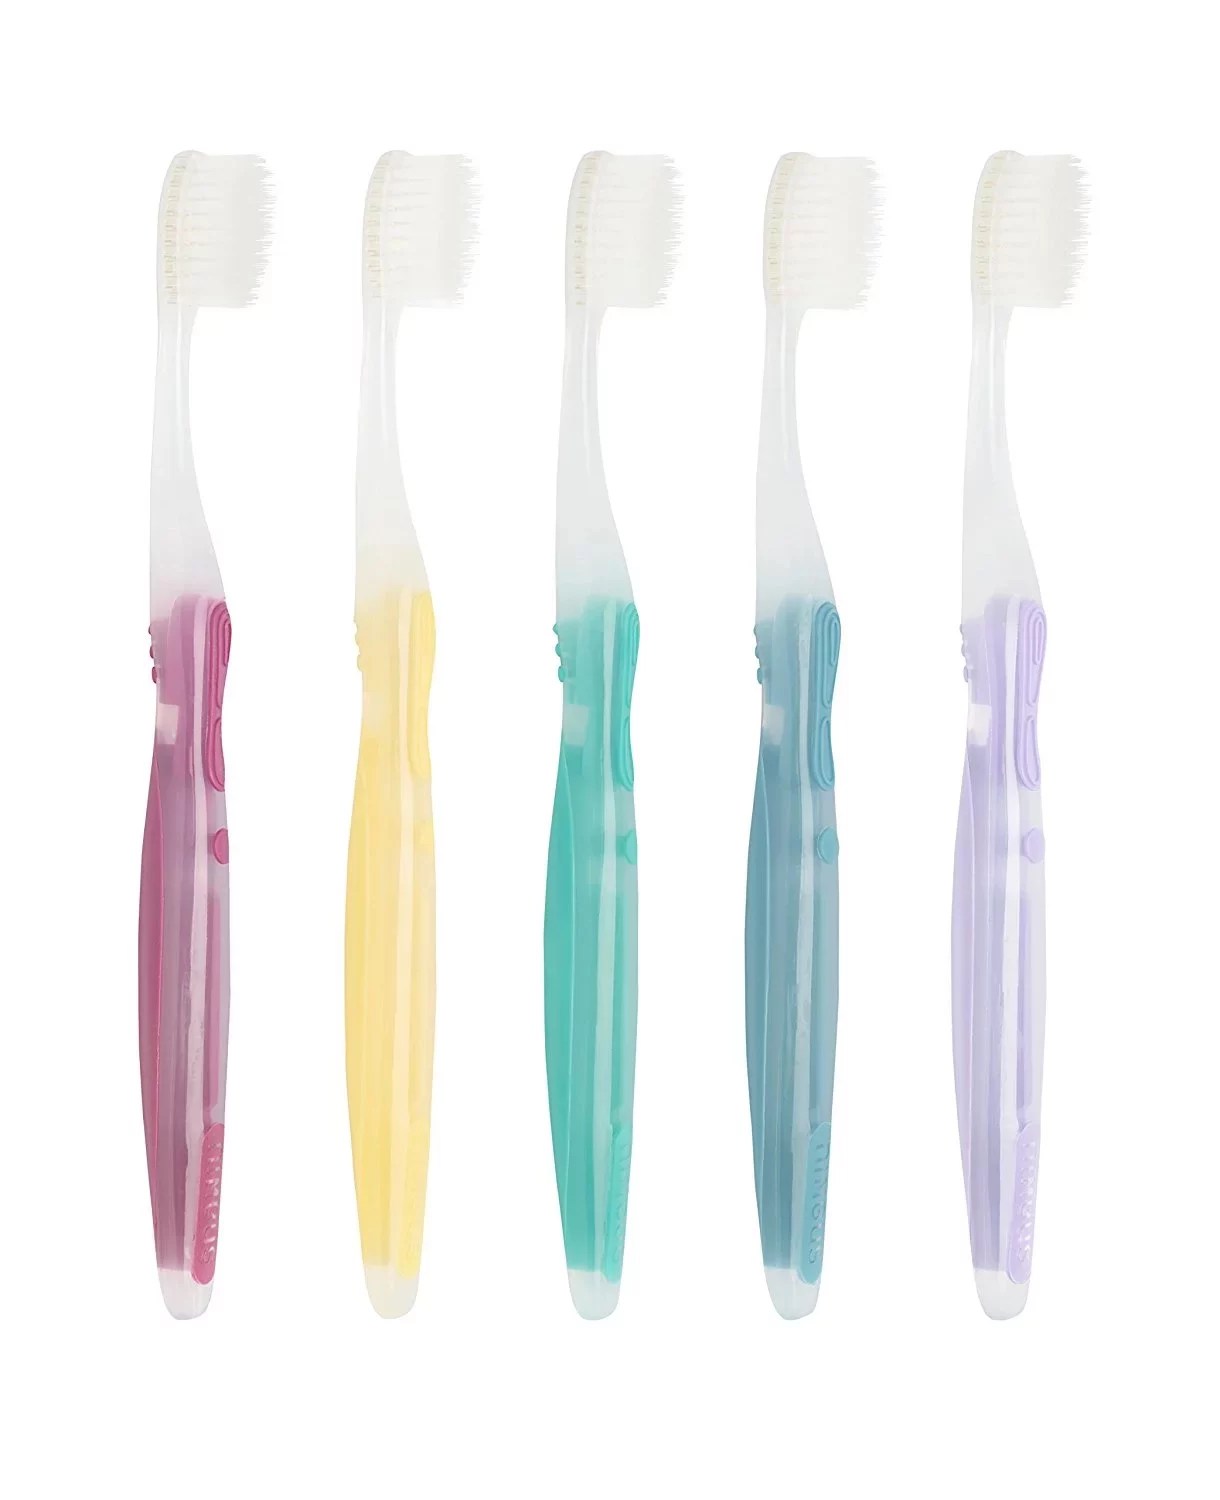 A five pack of nimbus soft toothbrushes